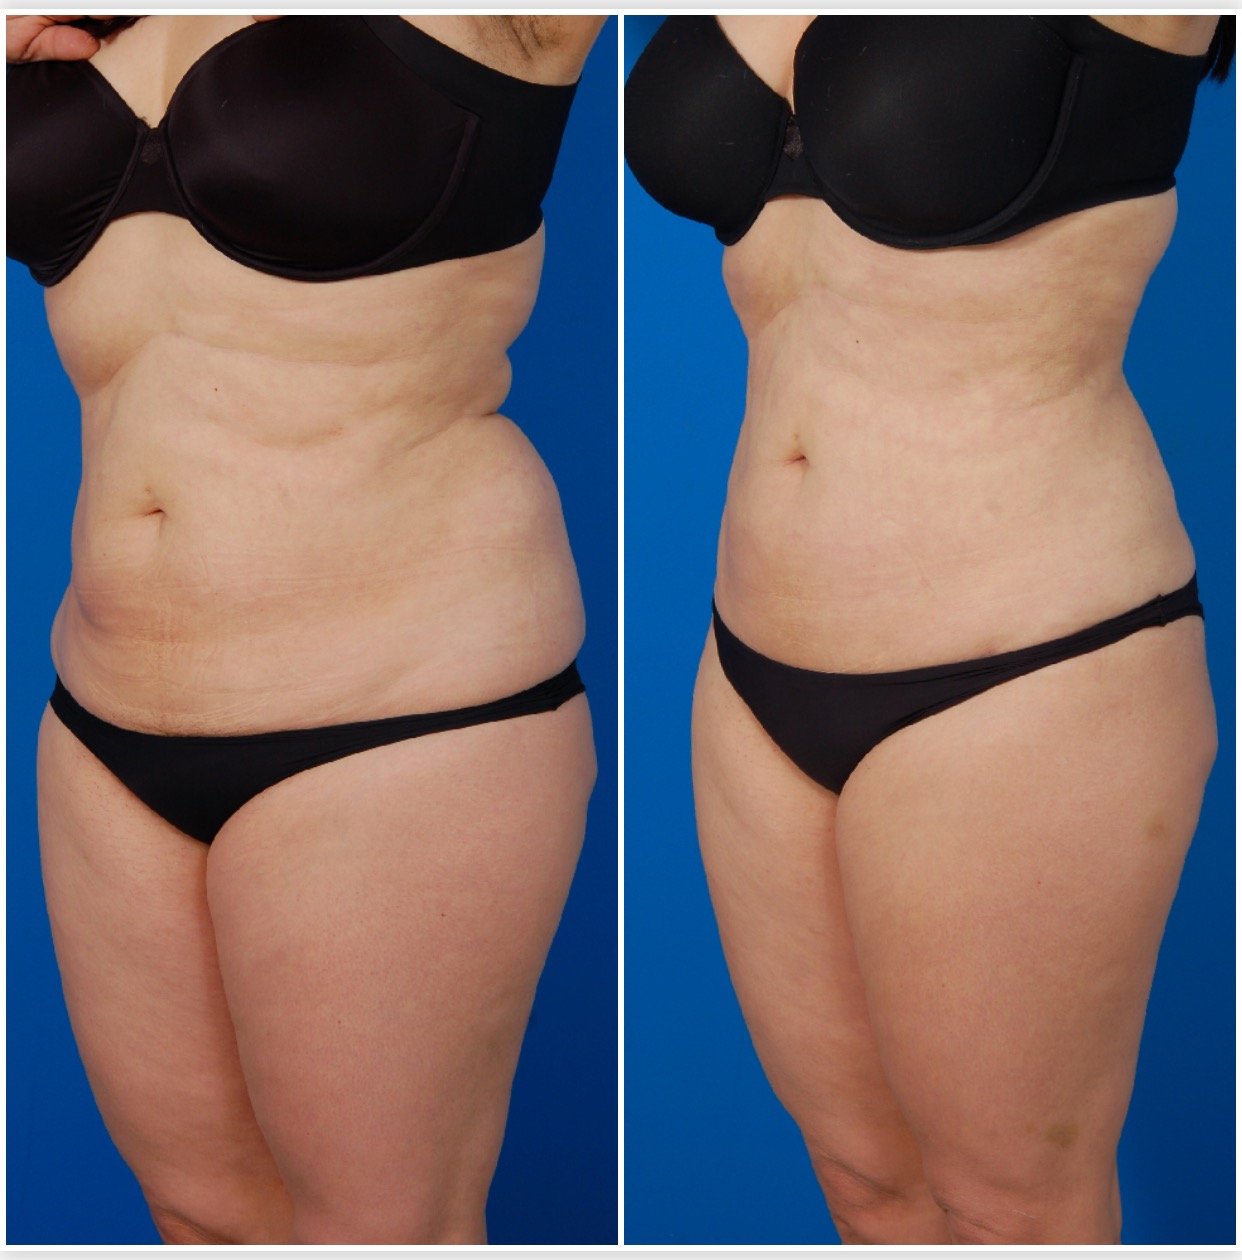 Woman's body, before and after Liposuction Revision Surgery, l-side oblique view, patient 1